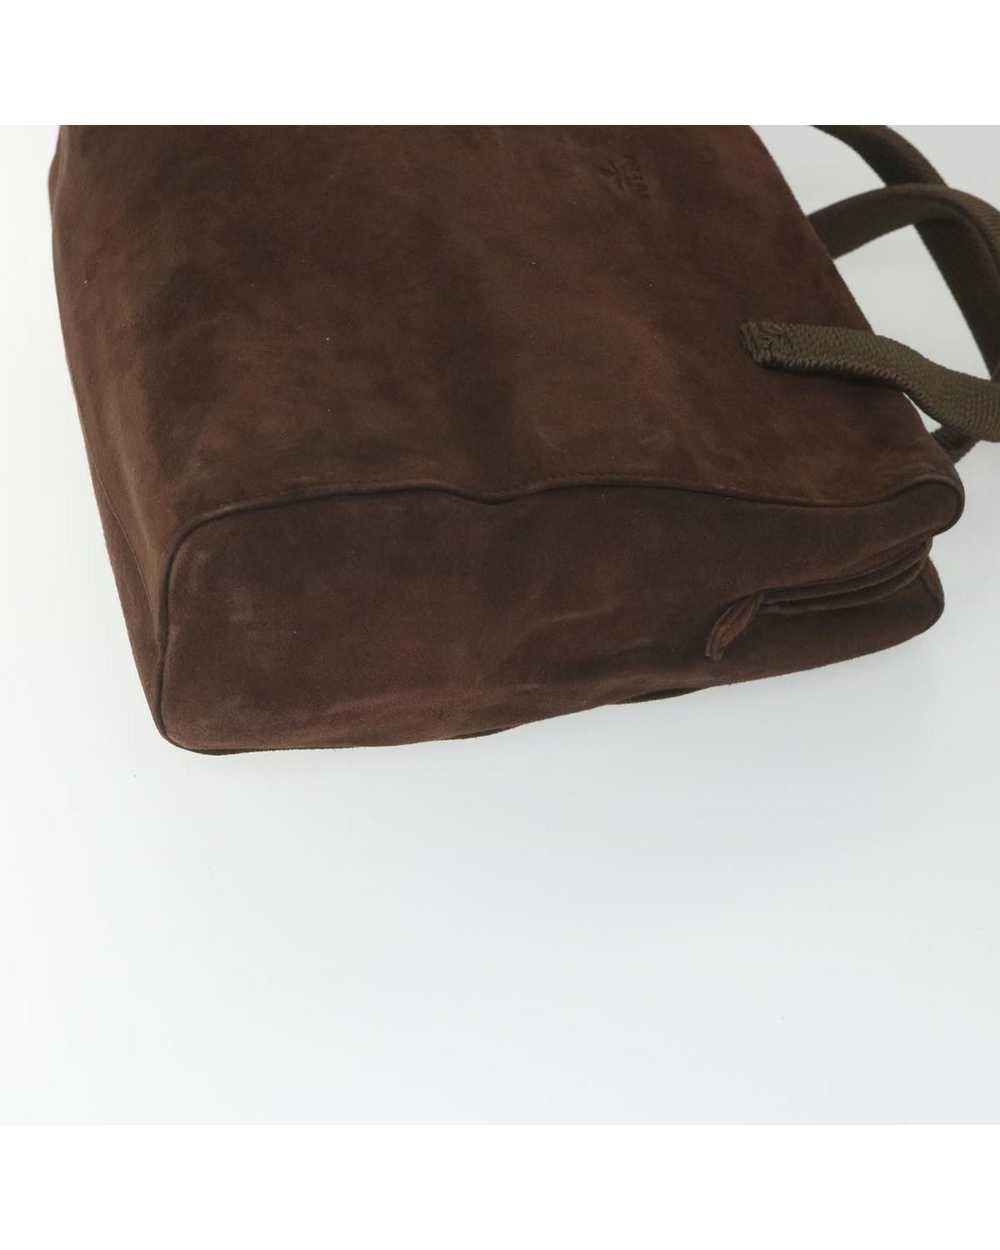 Prada Brown Suede Hand Bag with Accessories and I… - image 3